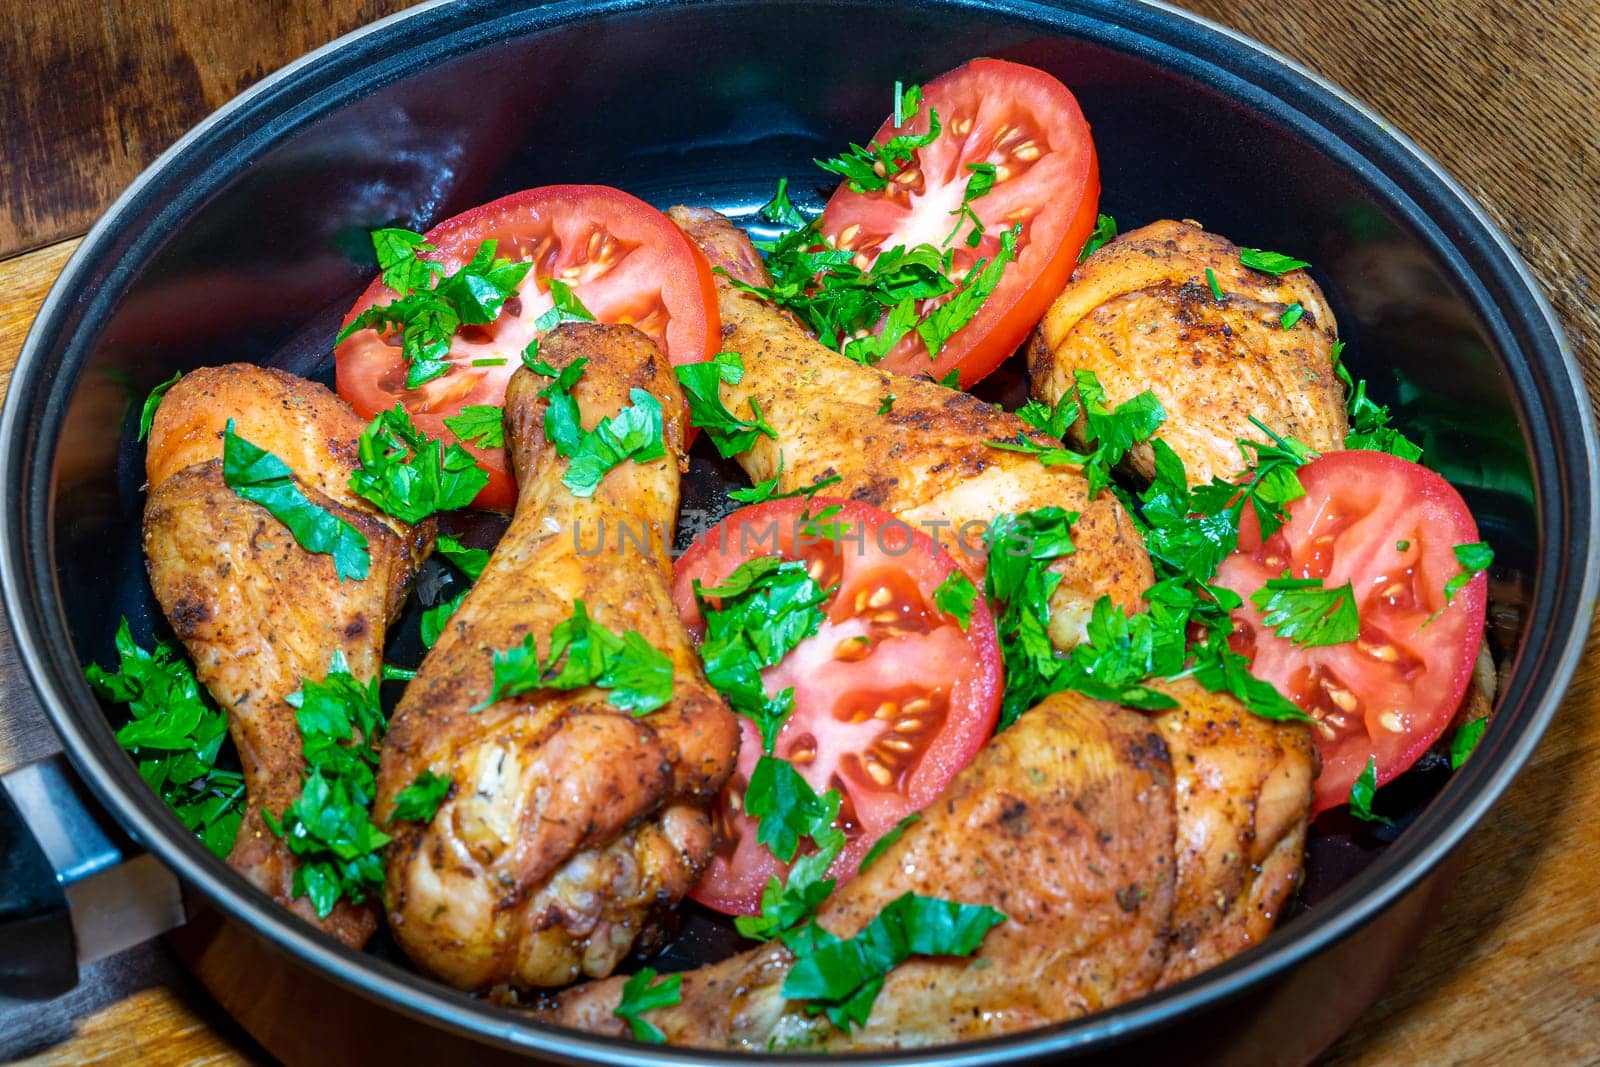 Baked chicken legs with tomatoes and herbs in a pan by Serhii_Voroshchuk